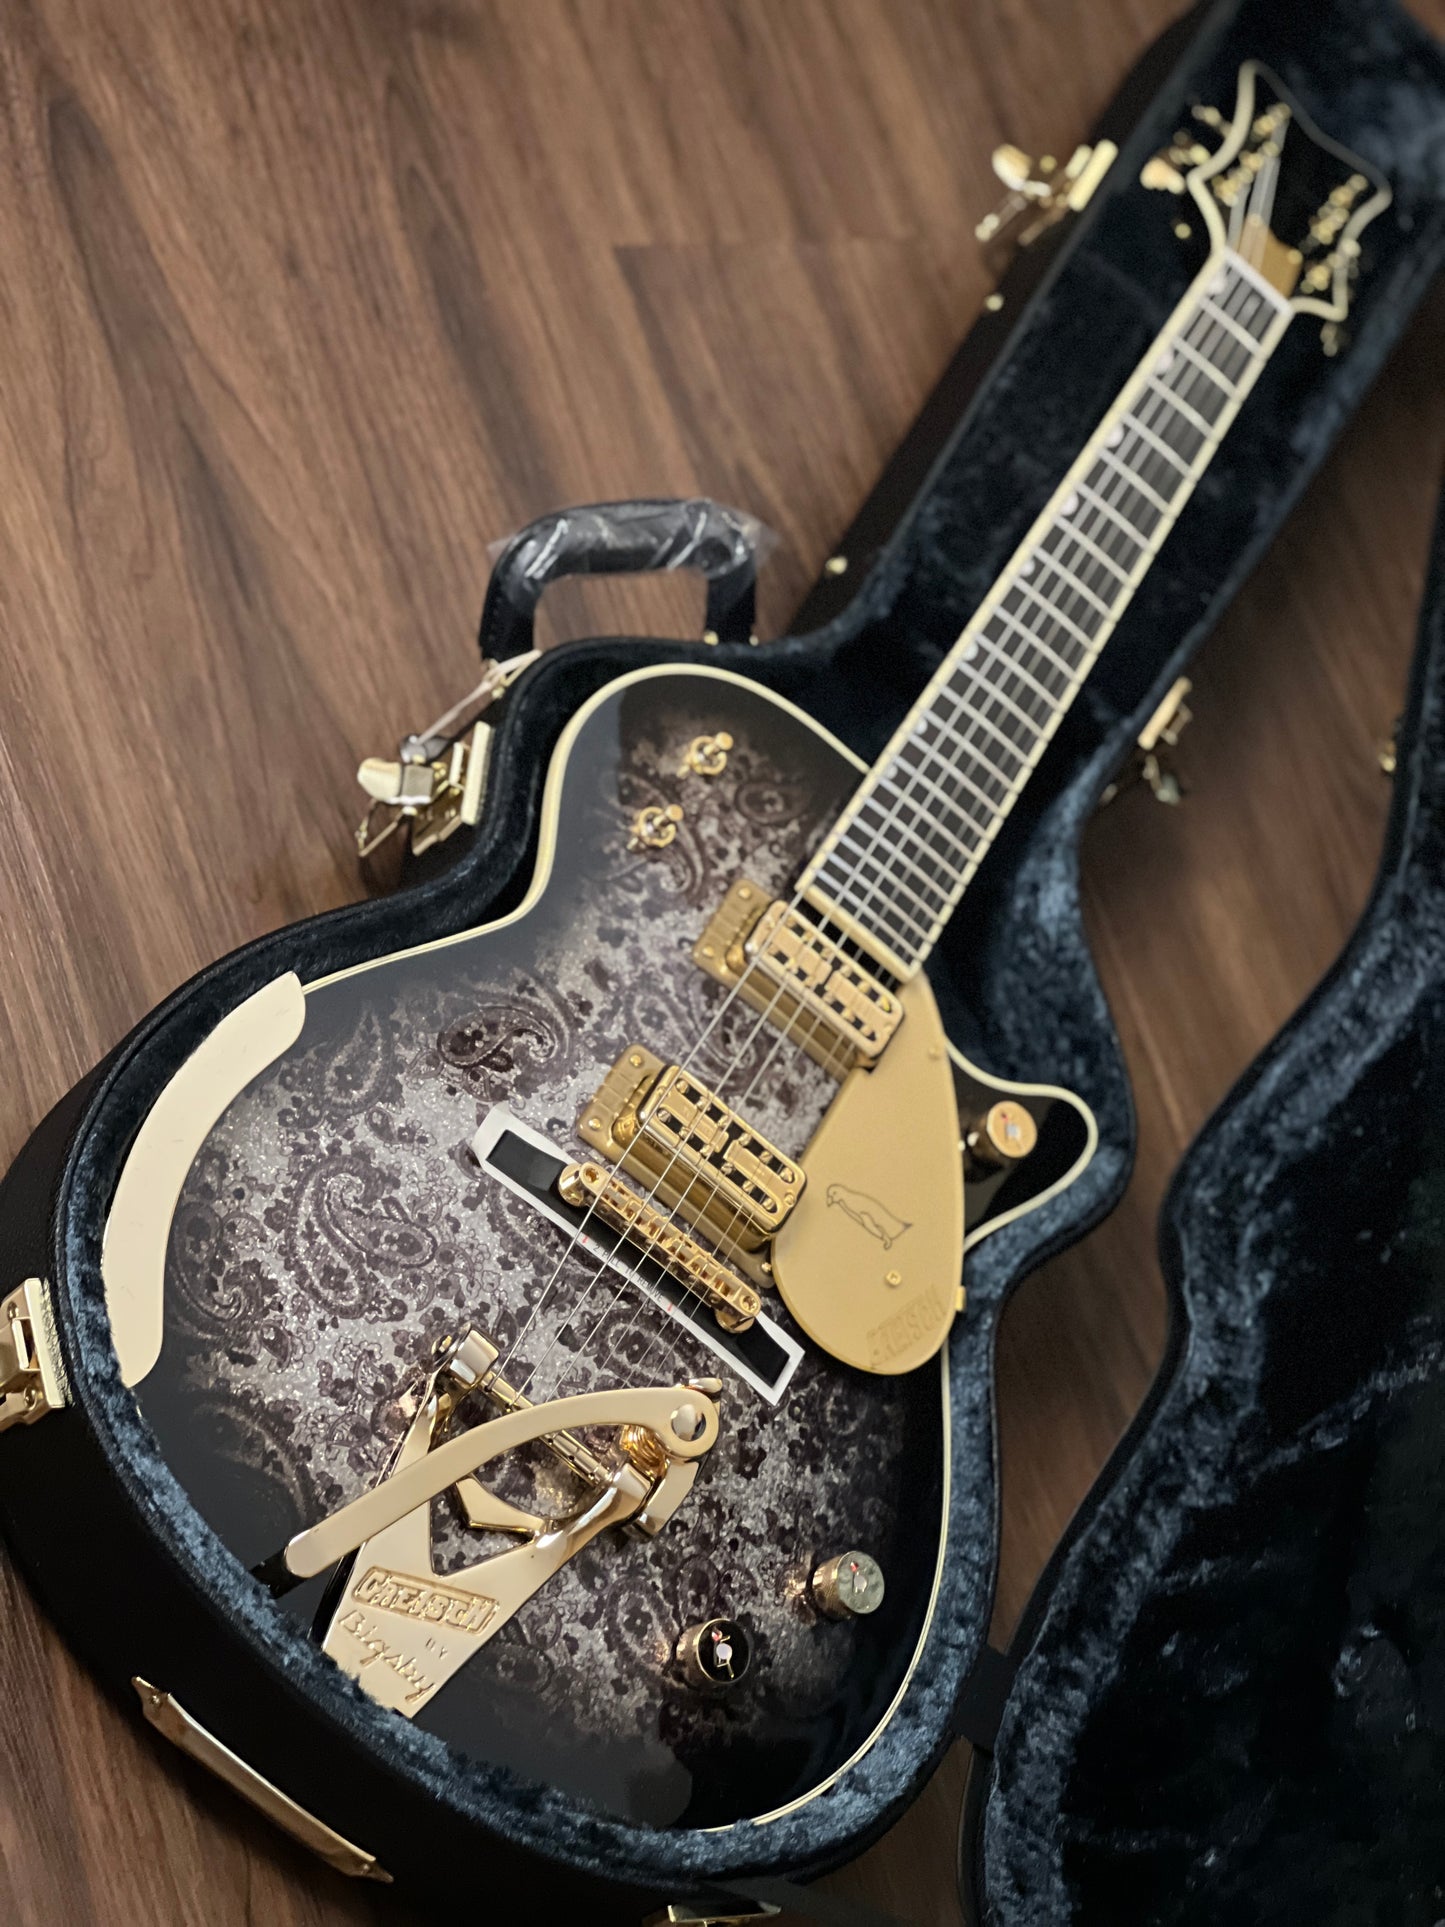 Gretsch G6134TG Limited edition Paisley Penguin in Blackburst over Black and Silver Paisley Sparkle